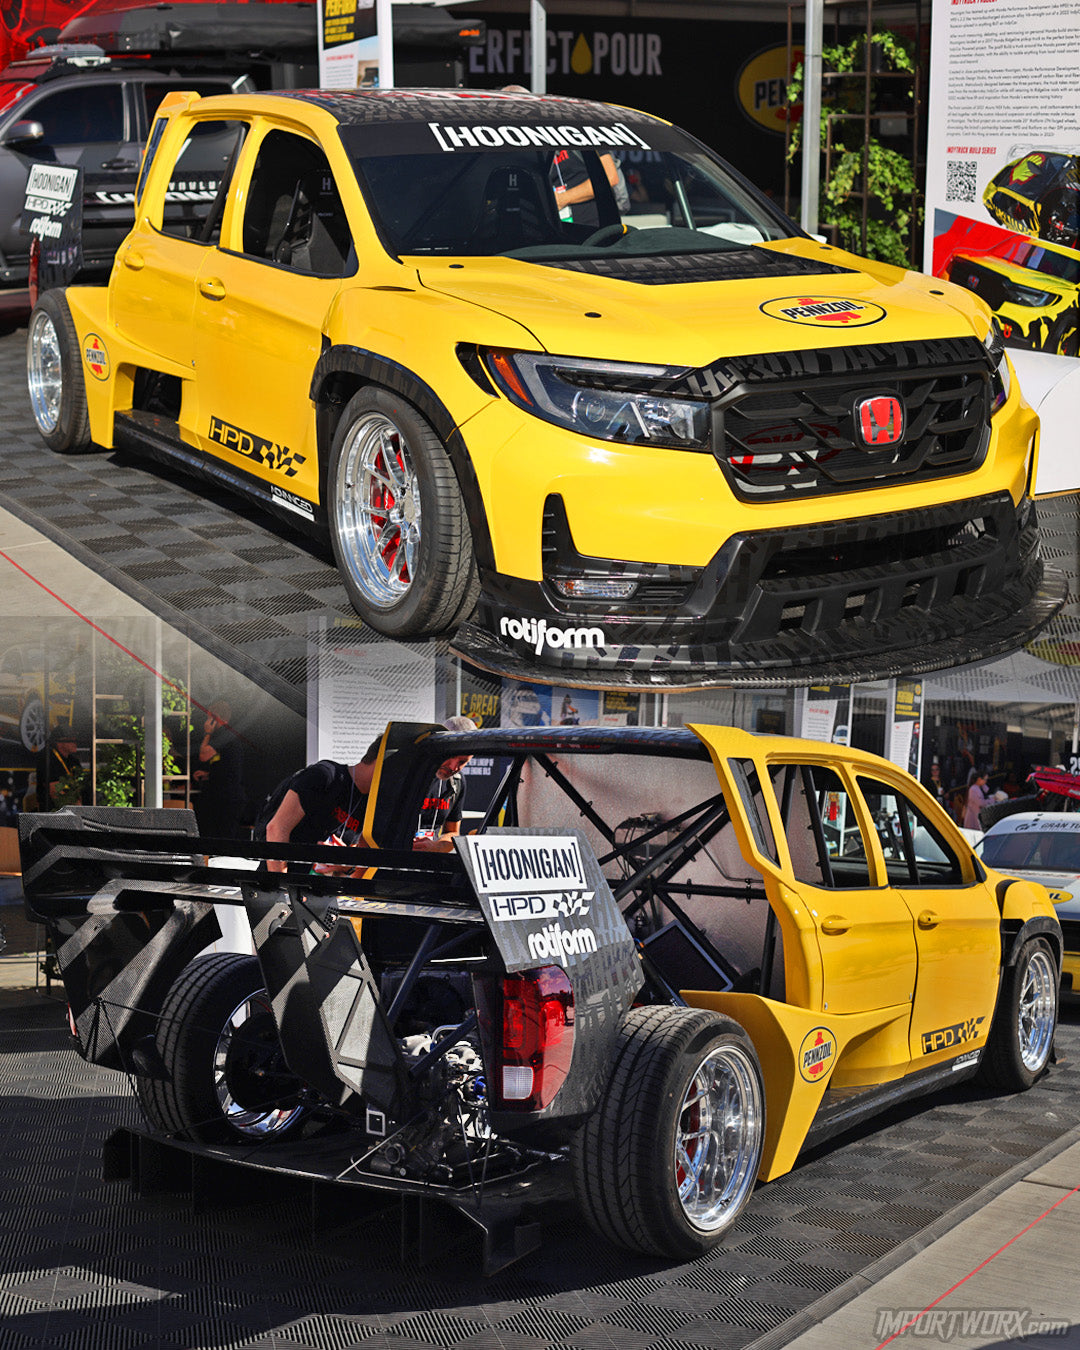 The Hoonigan Honda IndyTruck: A Fusion of Power and Insanity